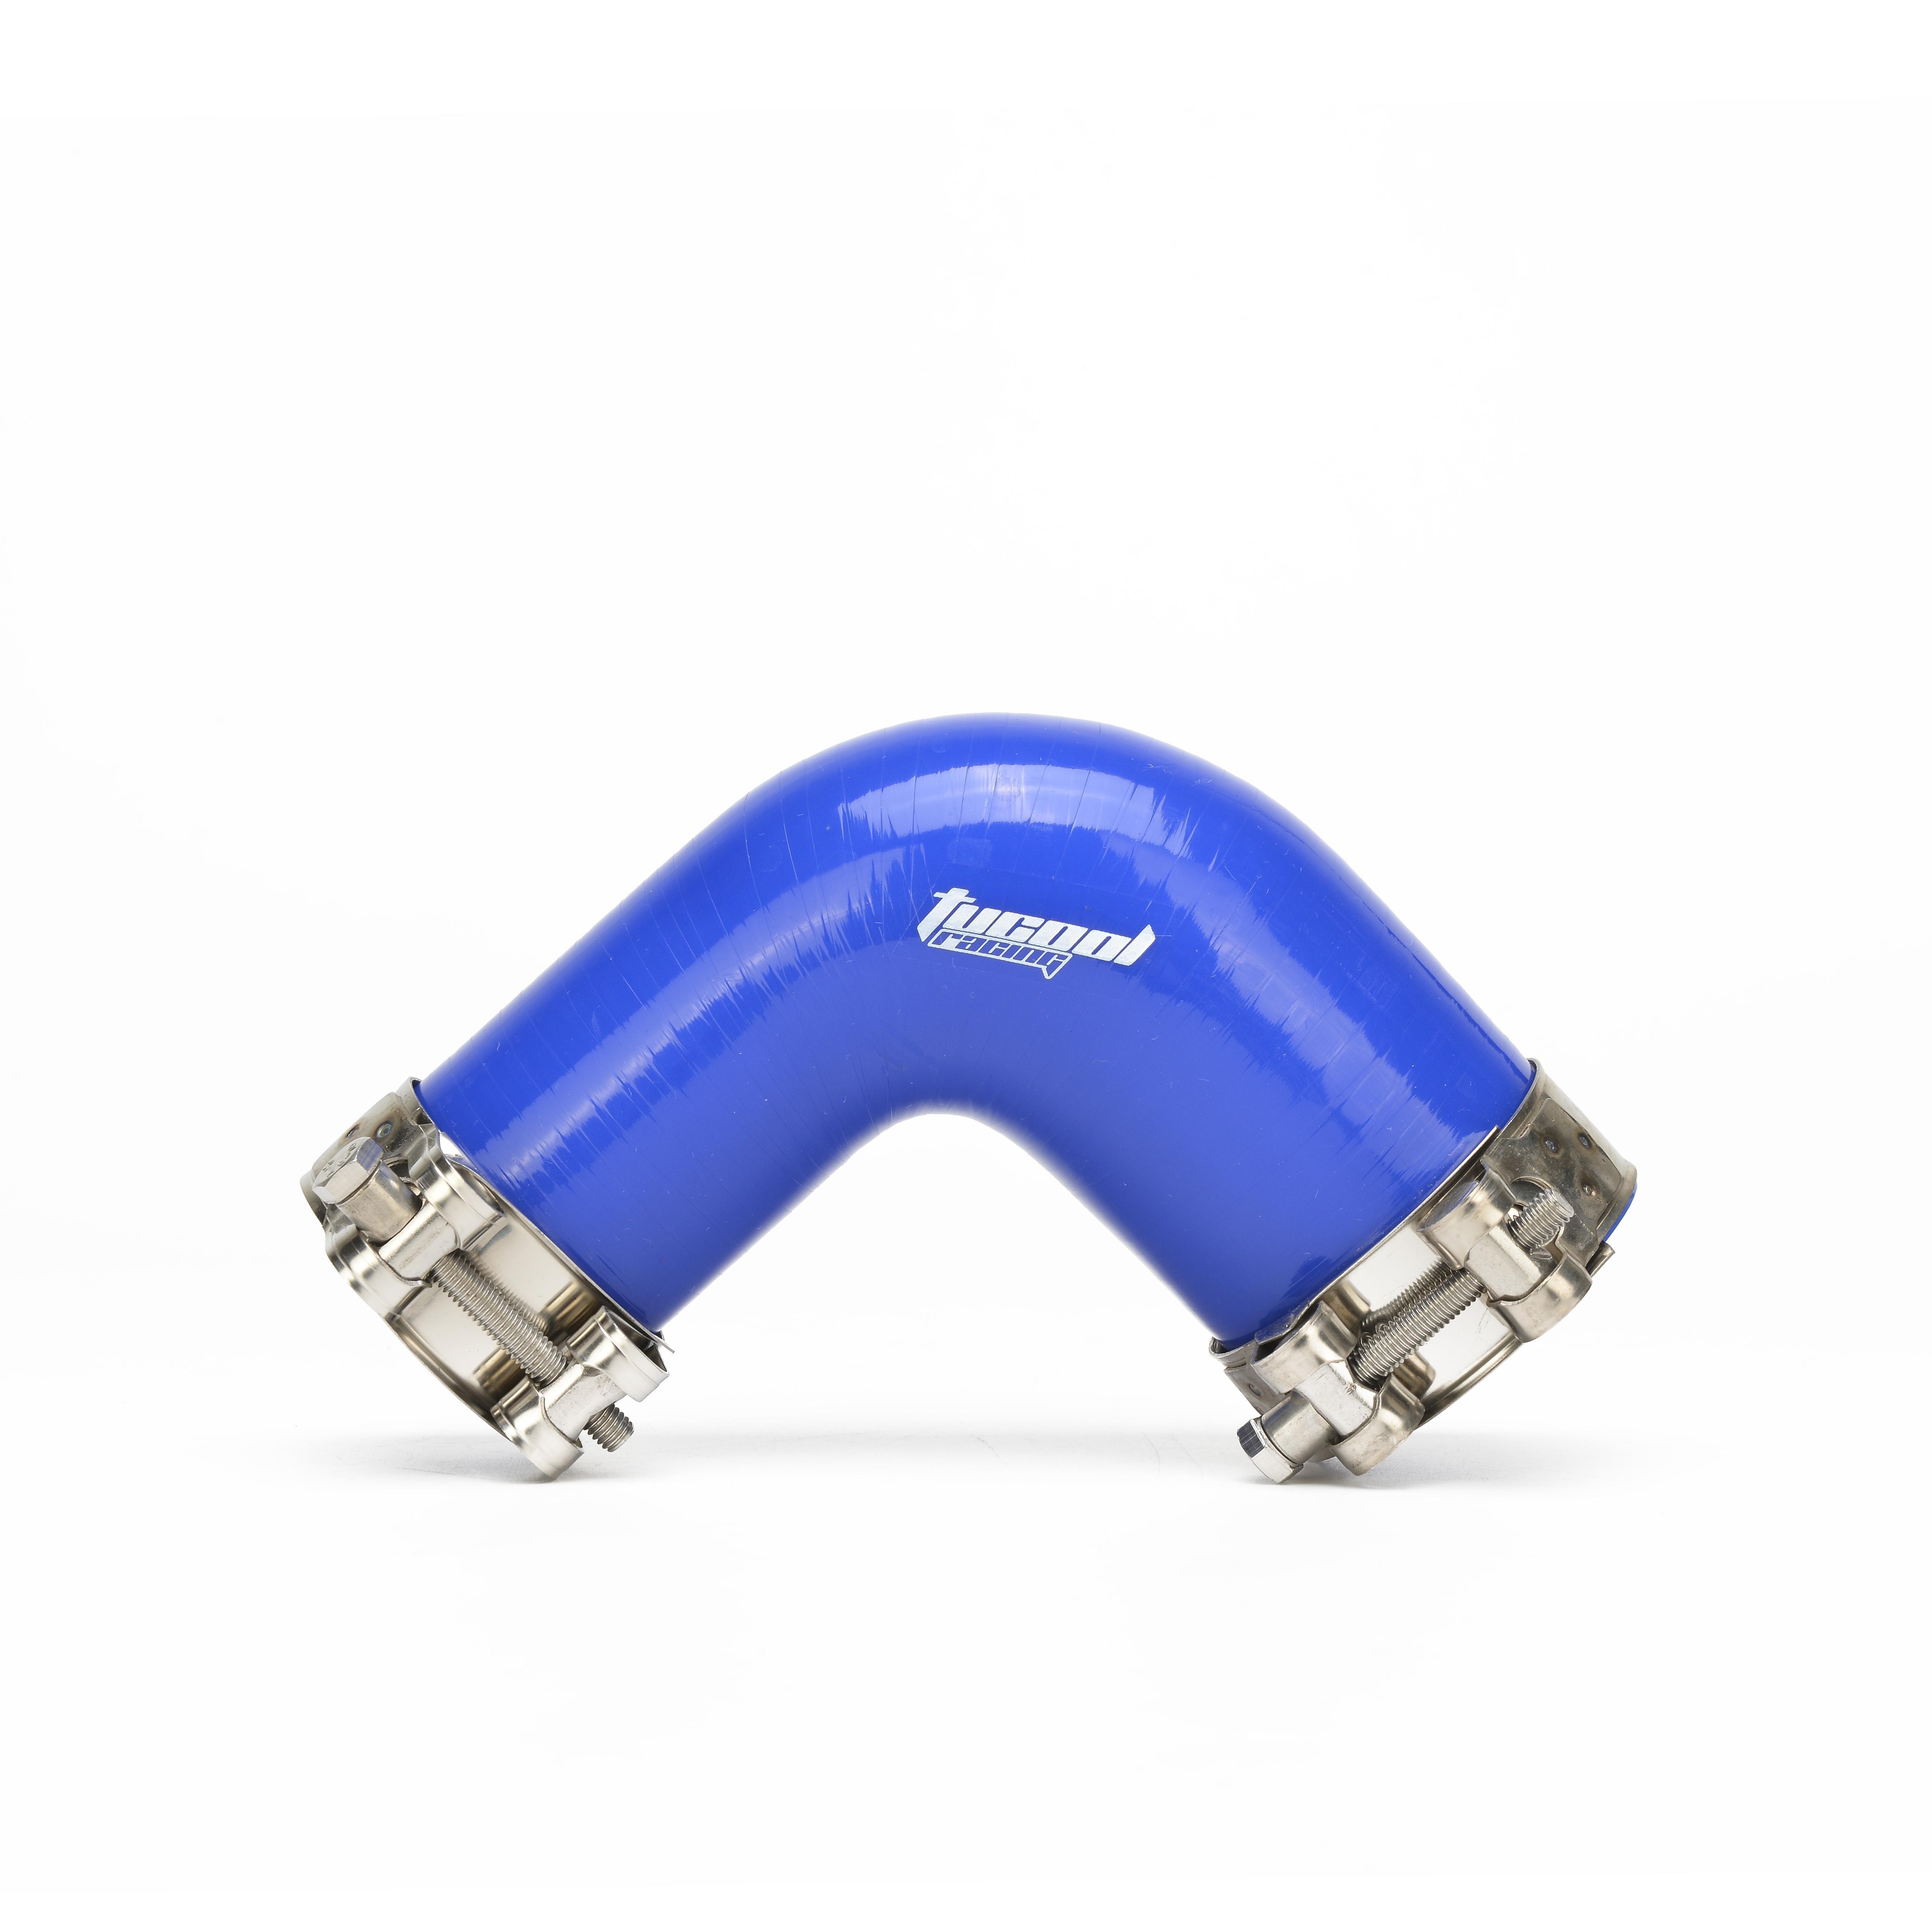 Reinforced Silicone Coupler and Clamp Kit, 2.5 - Blue